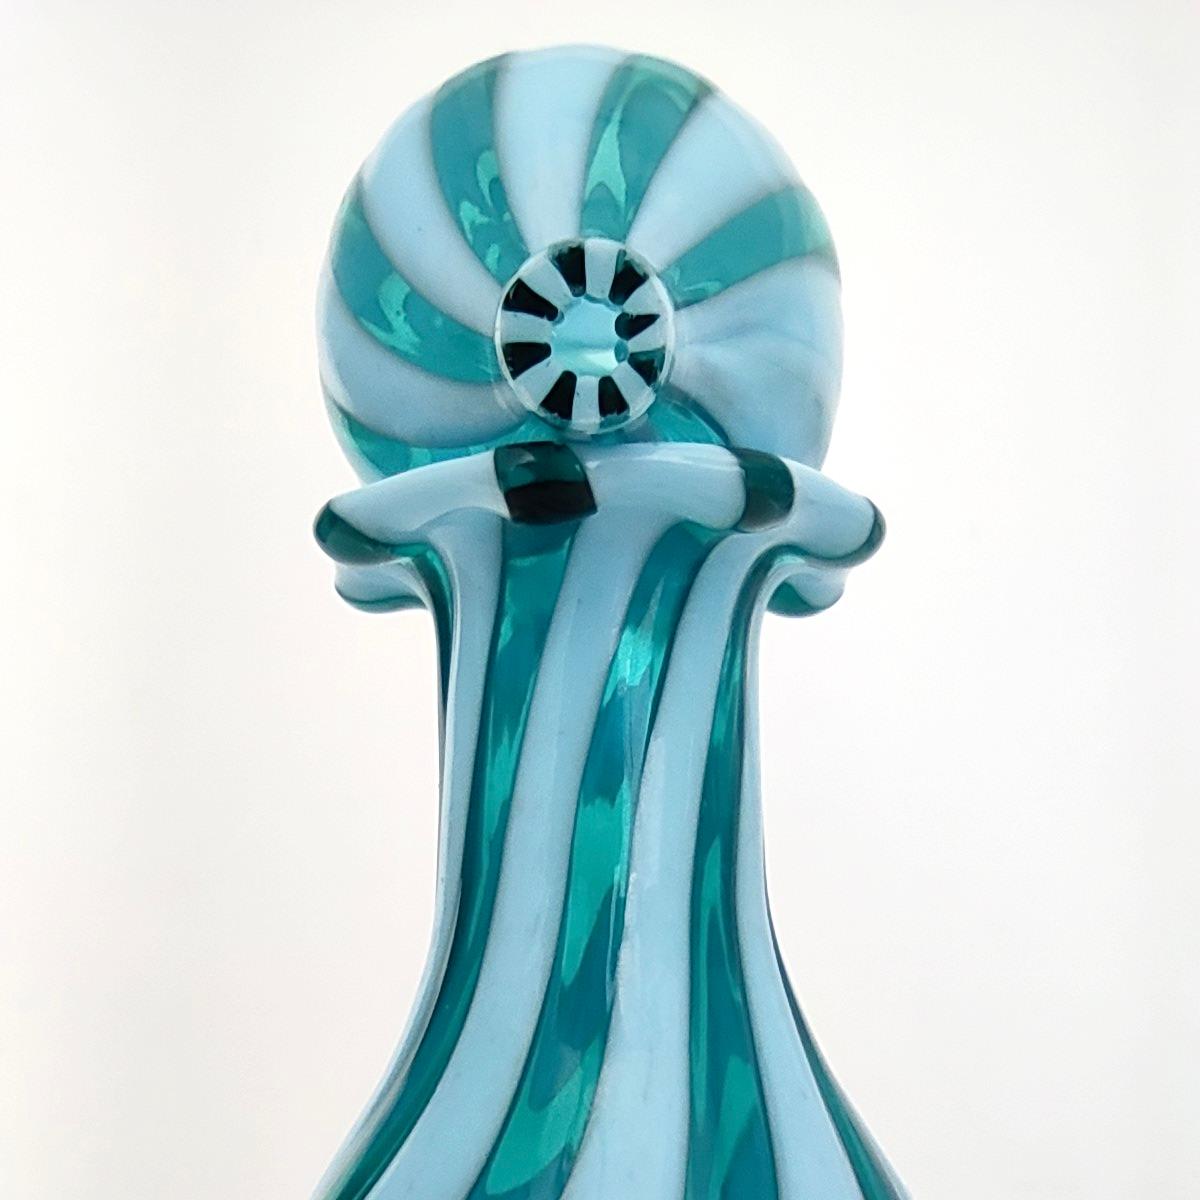 Murano Glass Decanter Ascribable to Toso with Teal and White Canes, Italy 2